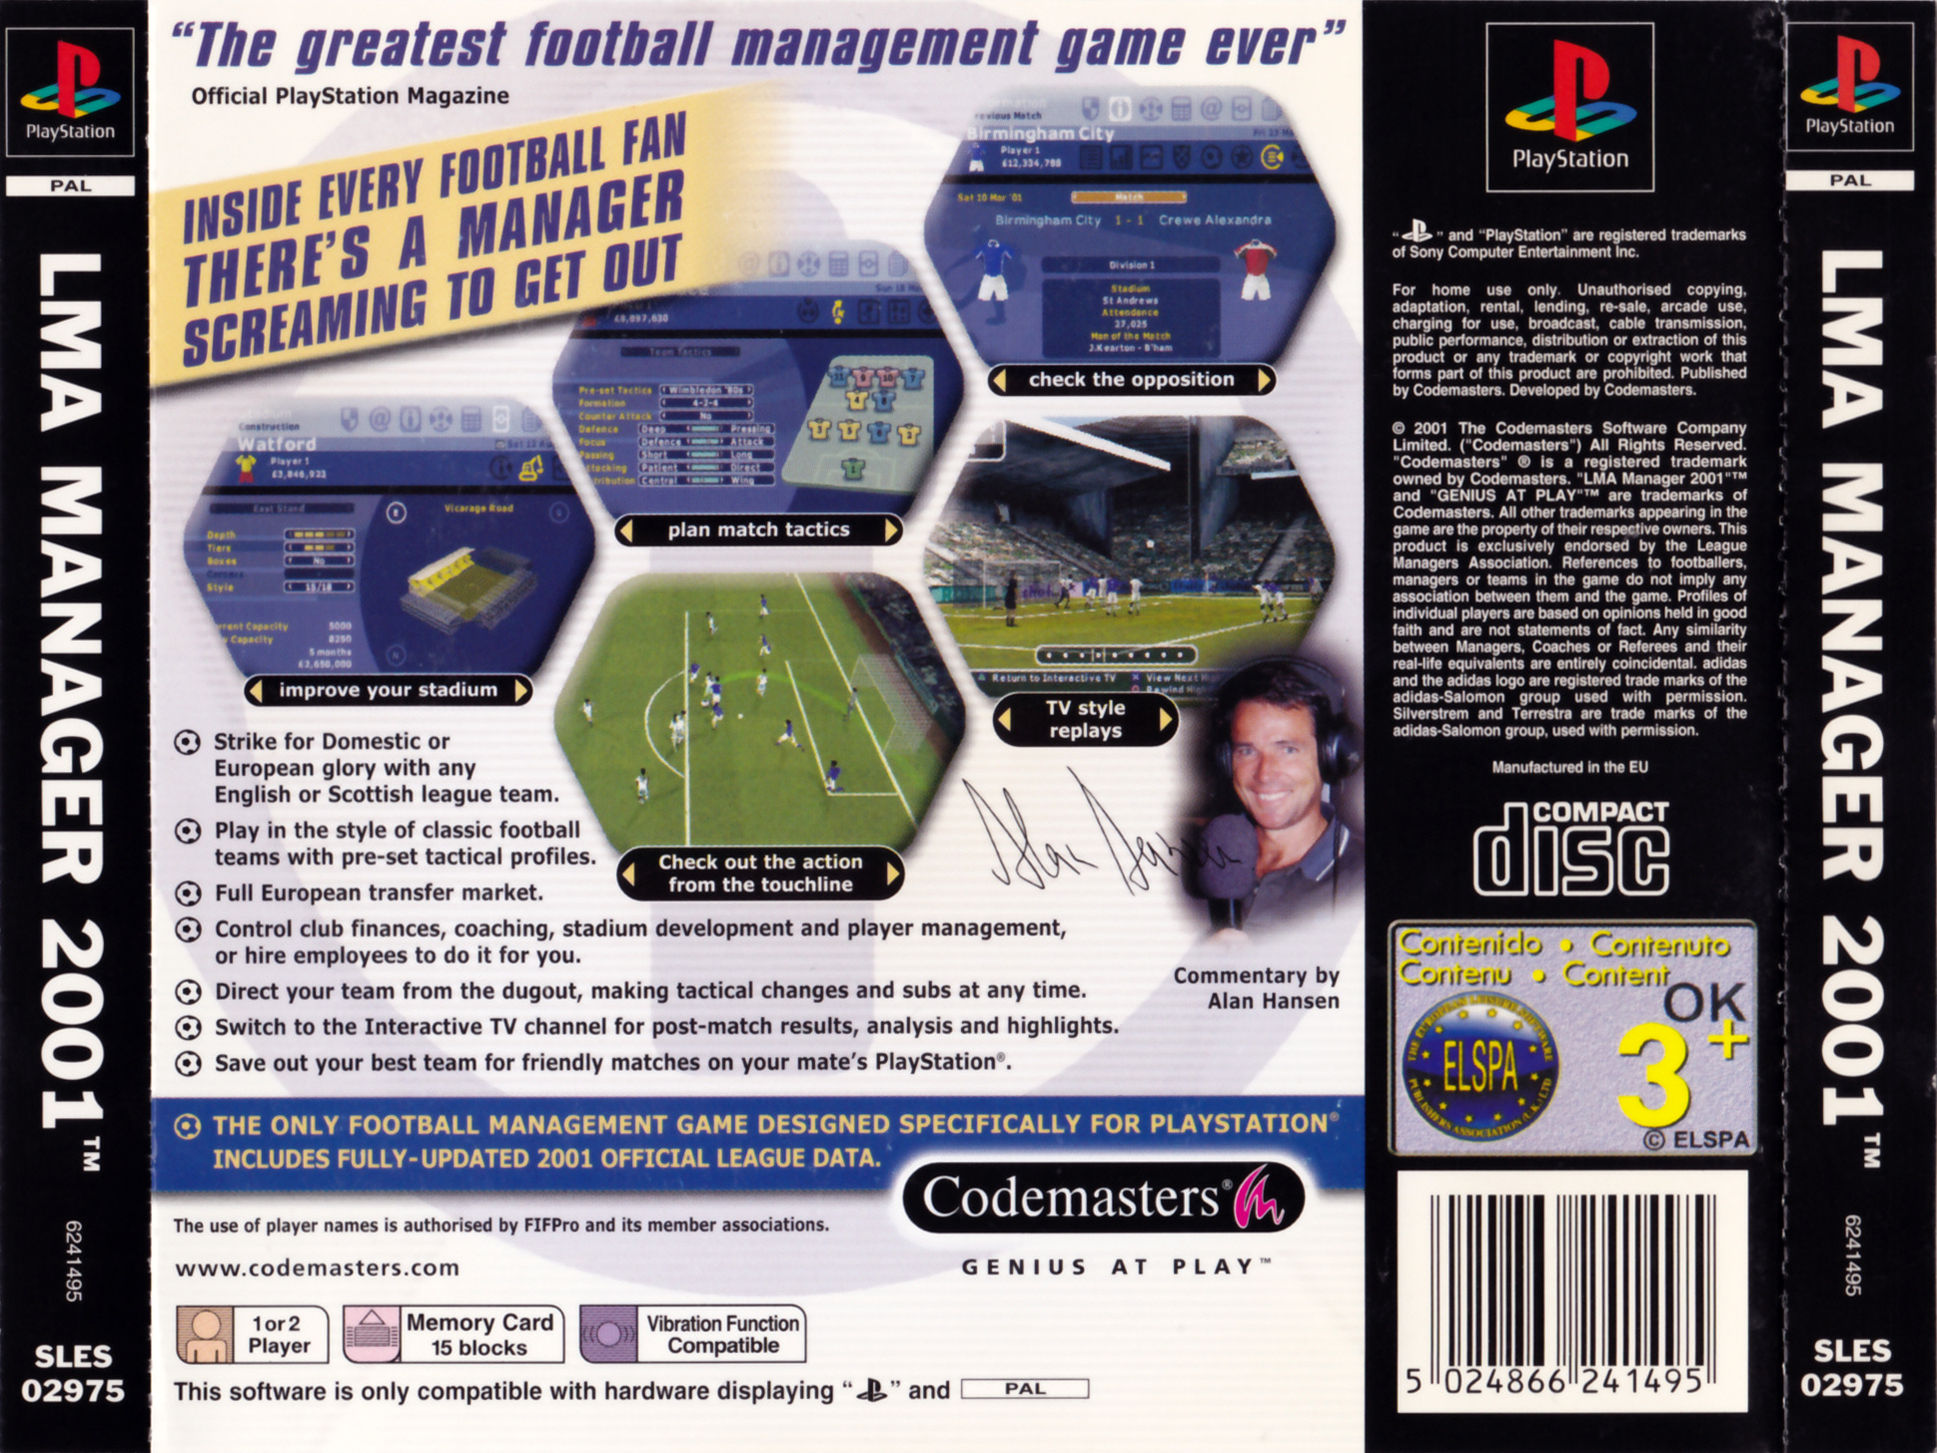 LMA Manager 2001 PSX cover